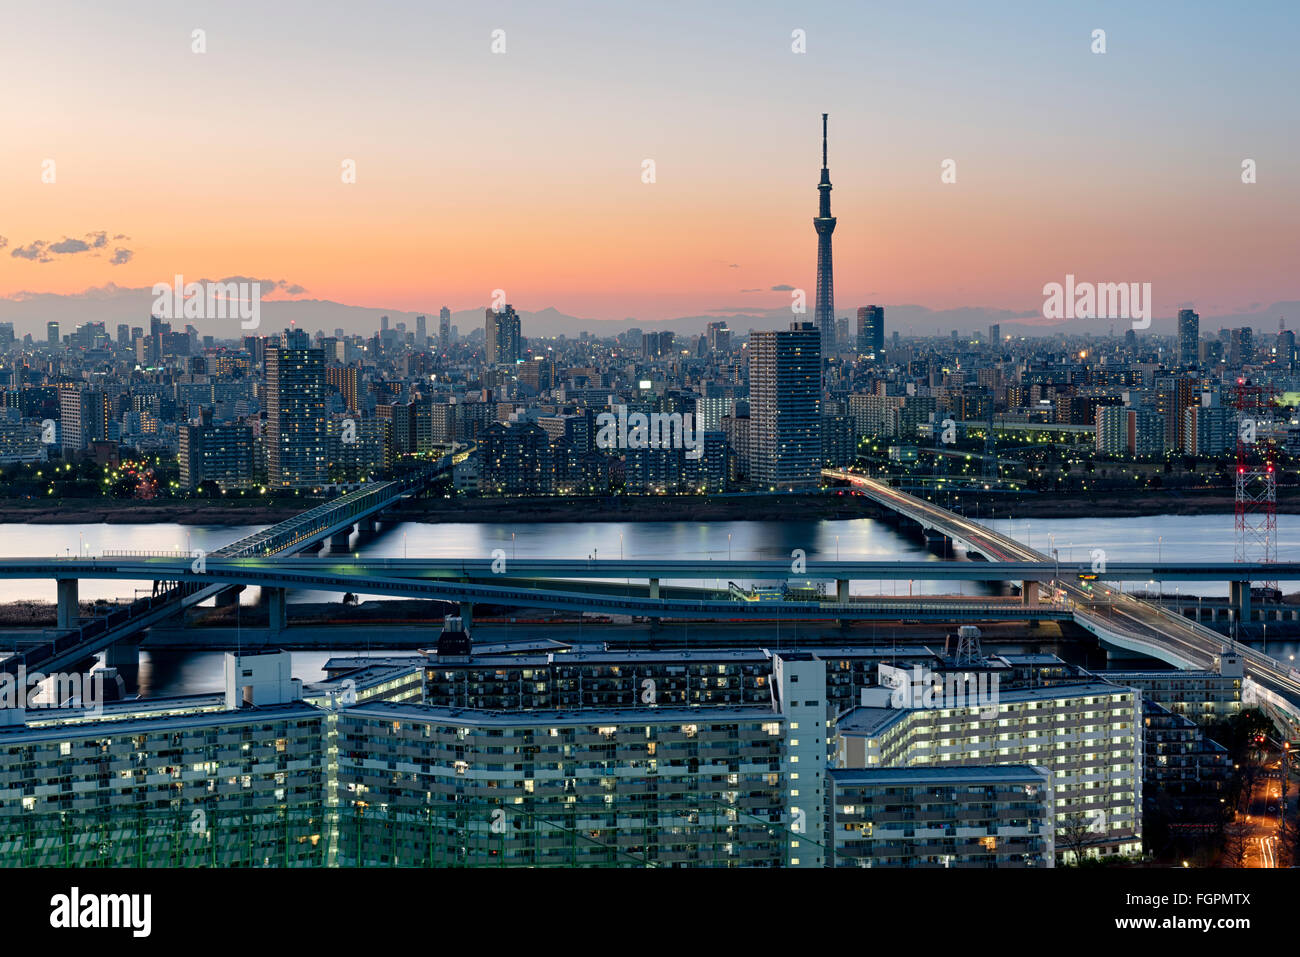 Tokyo; Japan -January 10; 2016: Tokyo Skyline at dusk, view of Asakusa district and the Sumida River. Skytree visible in the dis Stock Photo